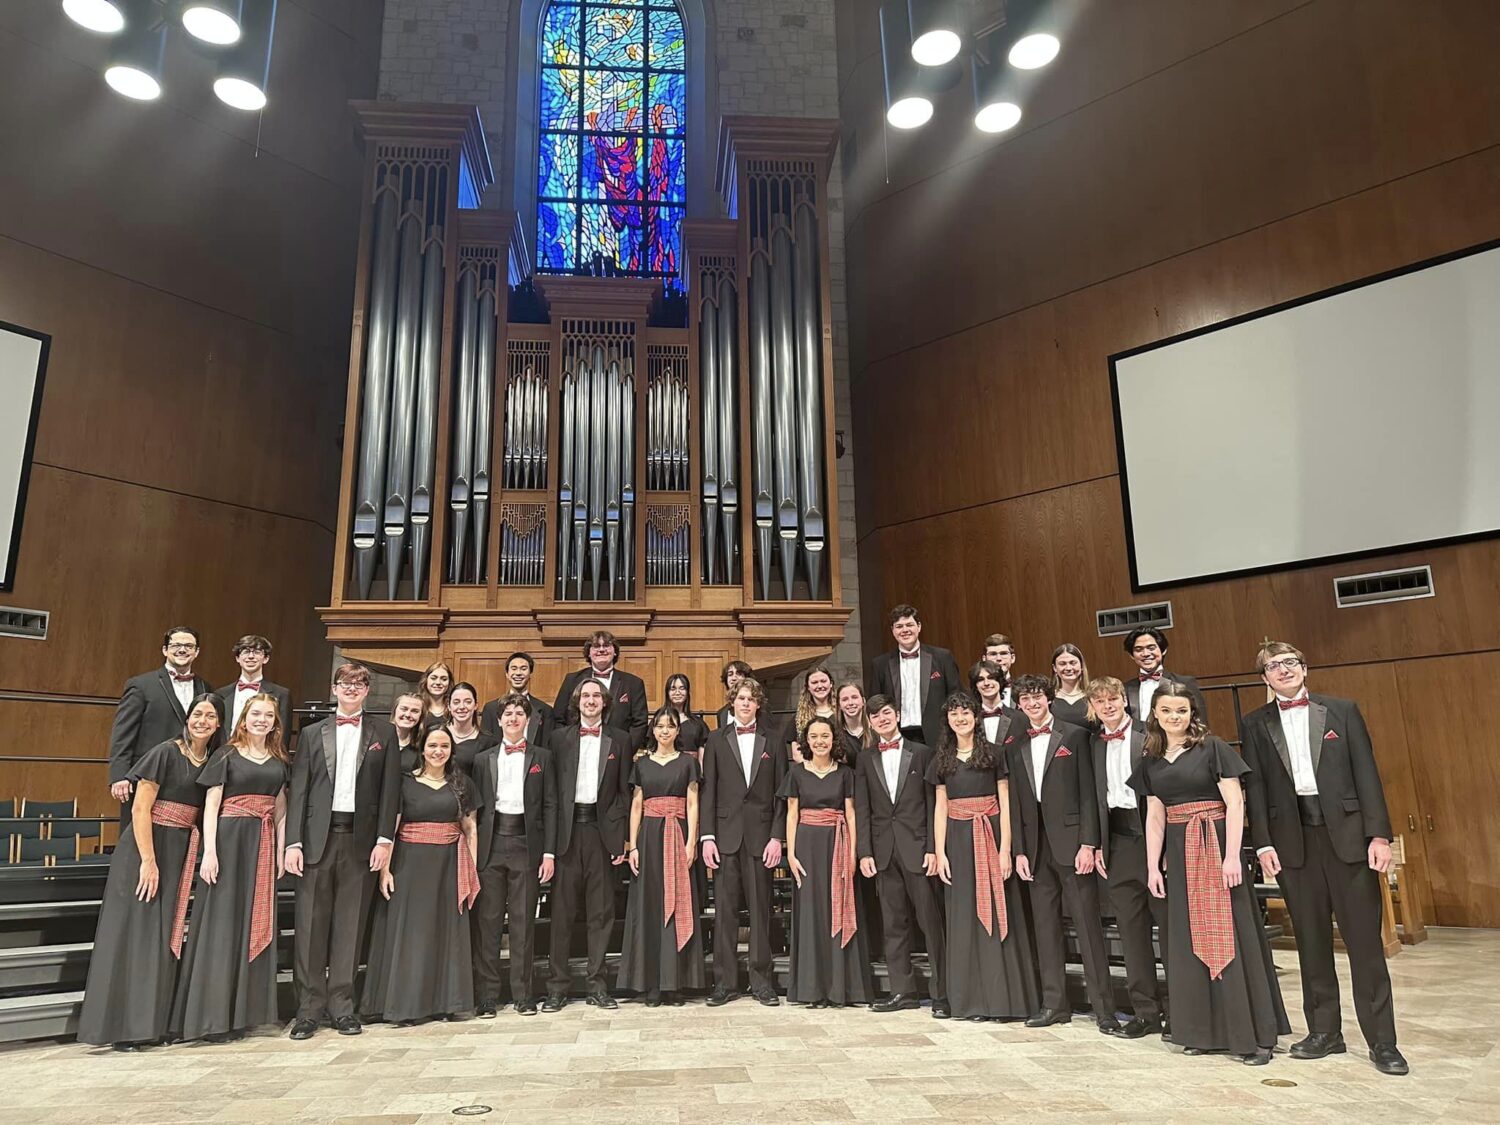 The Woodlands HS Chamber Choir placed 3rd at the American Classics Madrigal & Chamber Choir Festival in San Antonio!